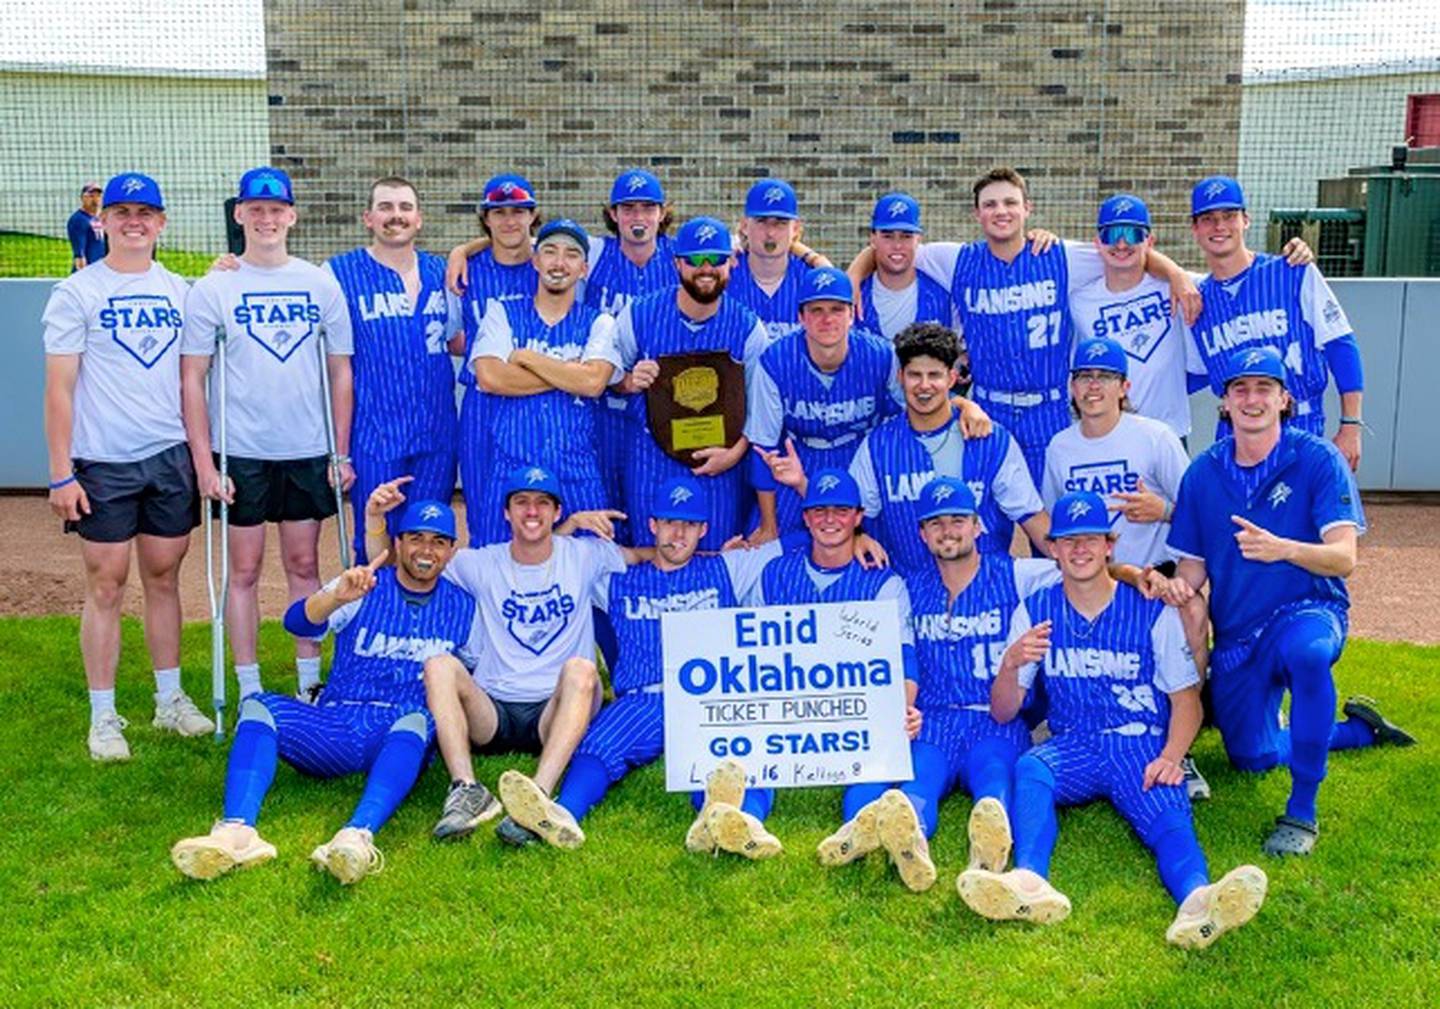 Former St. Bede multi-sport athlete Jarret Olson (holding trophy) is the pitching coach at Lansing Community College where he's helped the Stars to back-to-back NJCAA Division II World Series appearances.